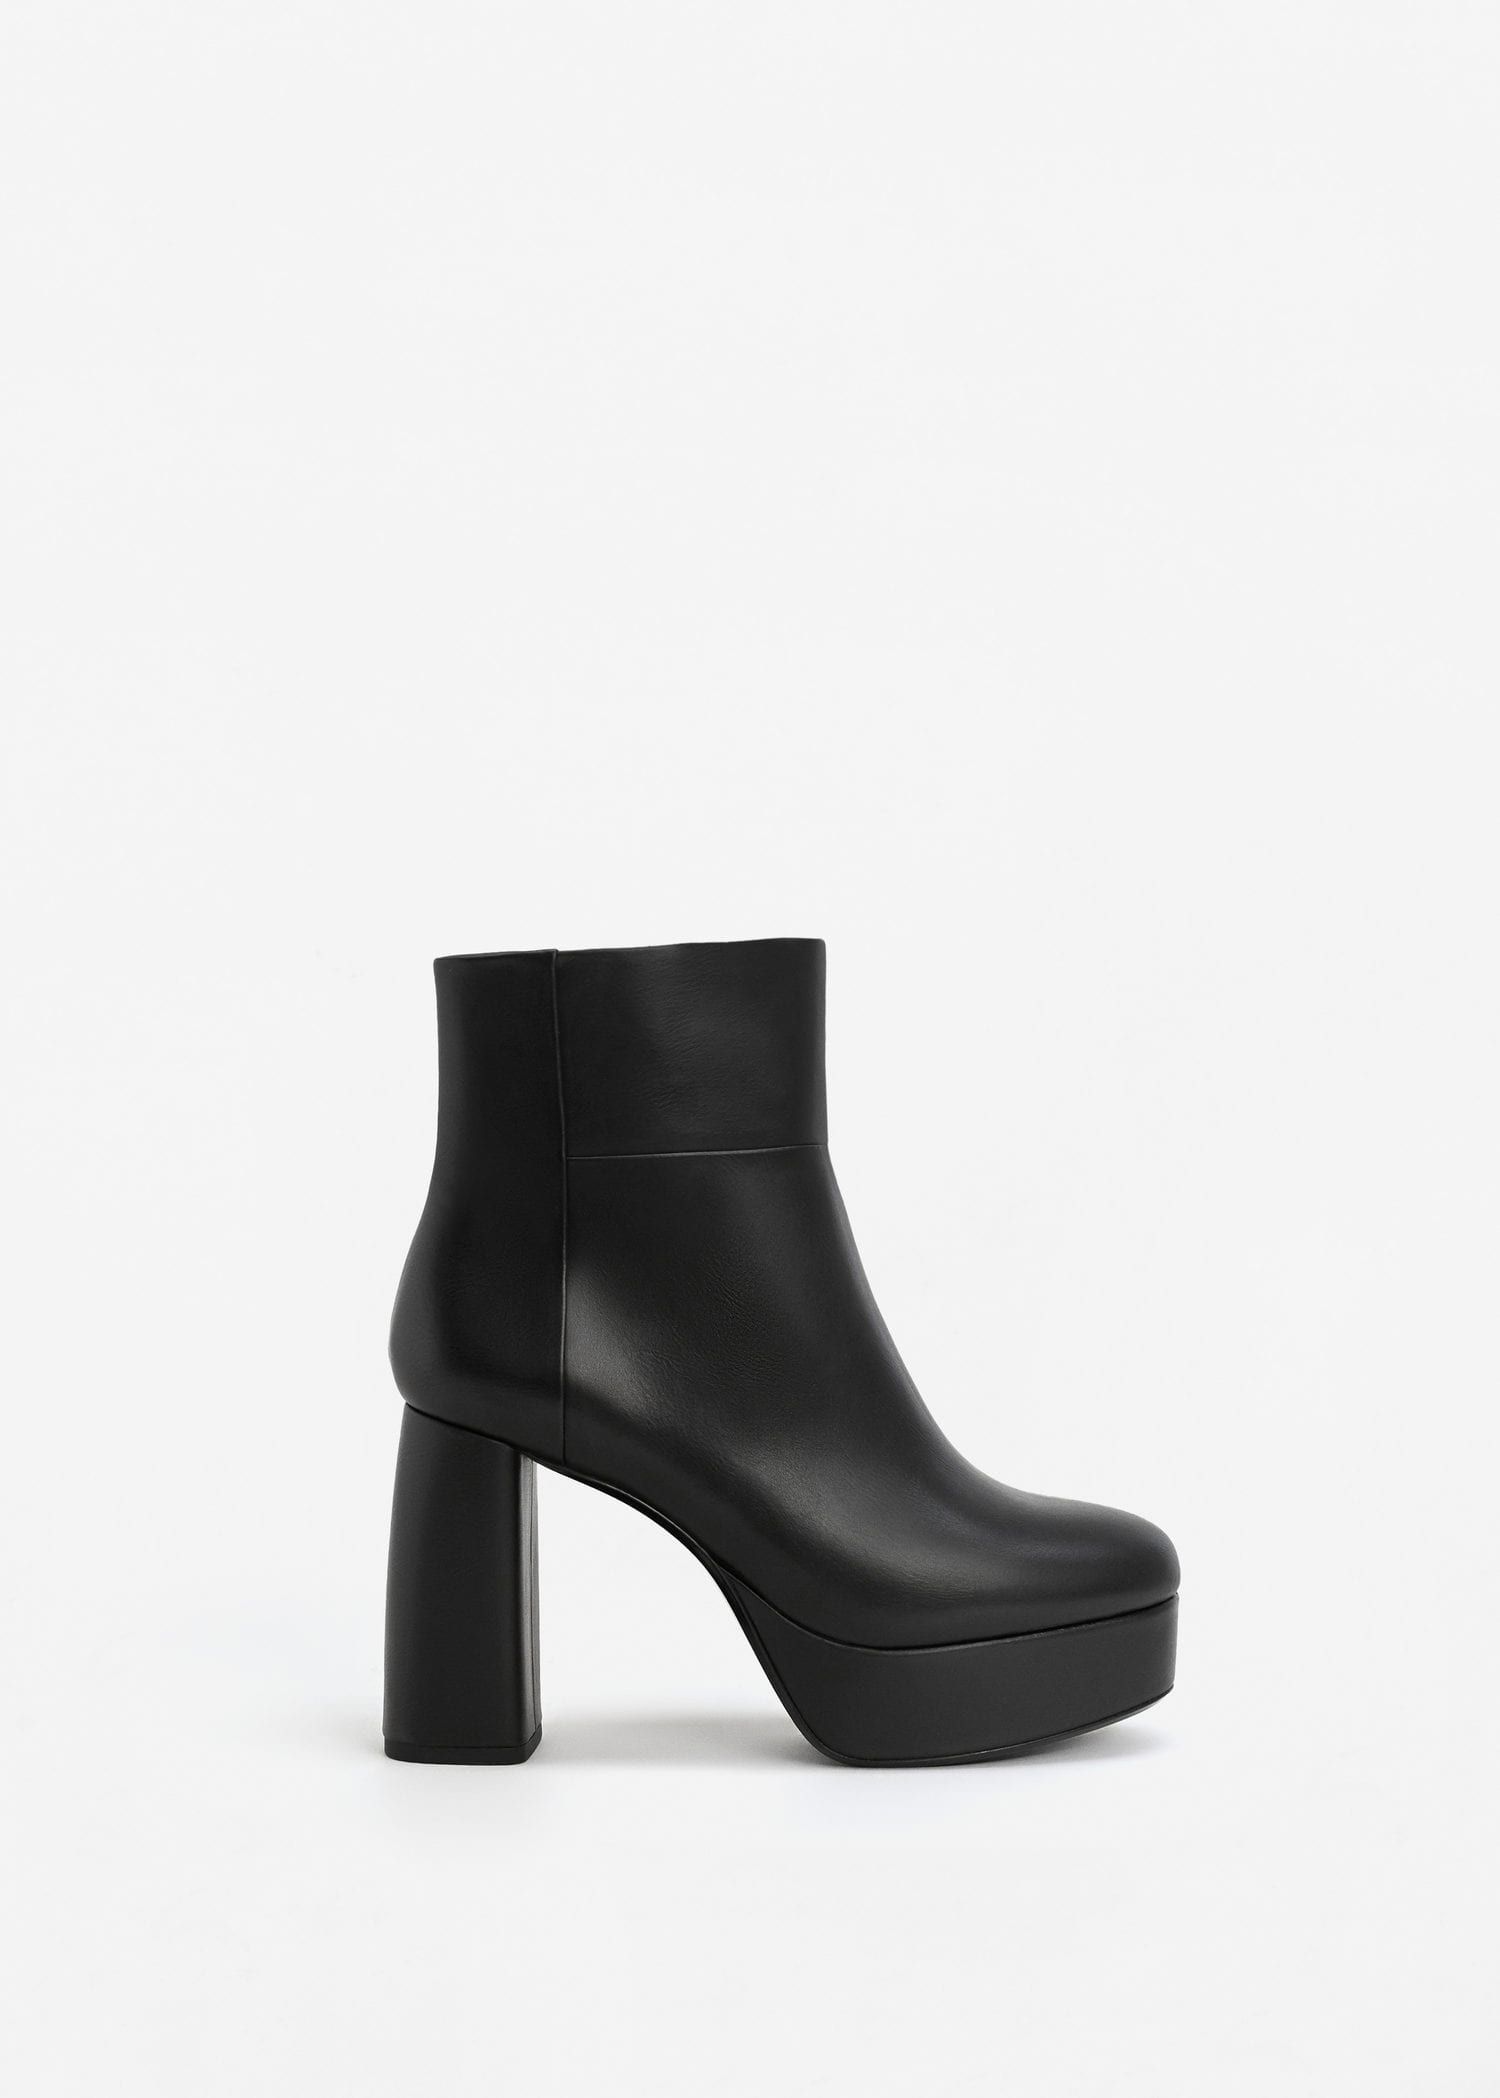 these platform boots will give you a few extra inches